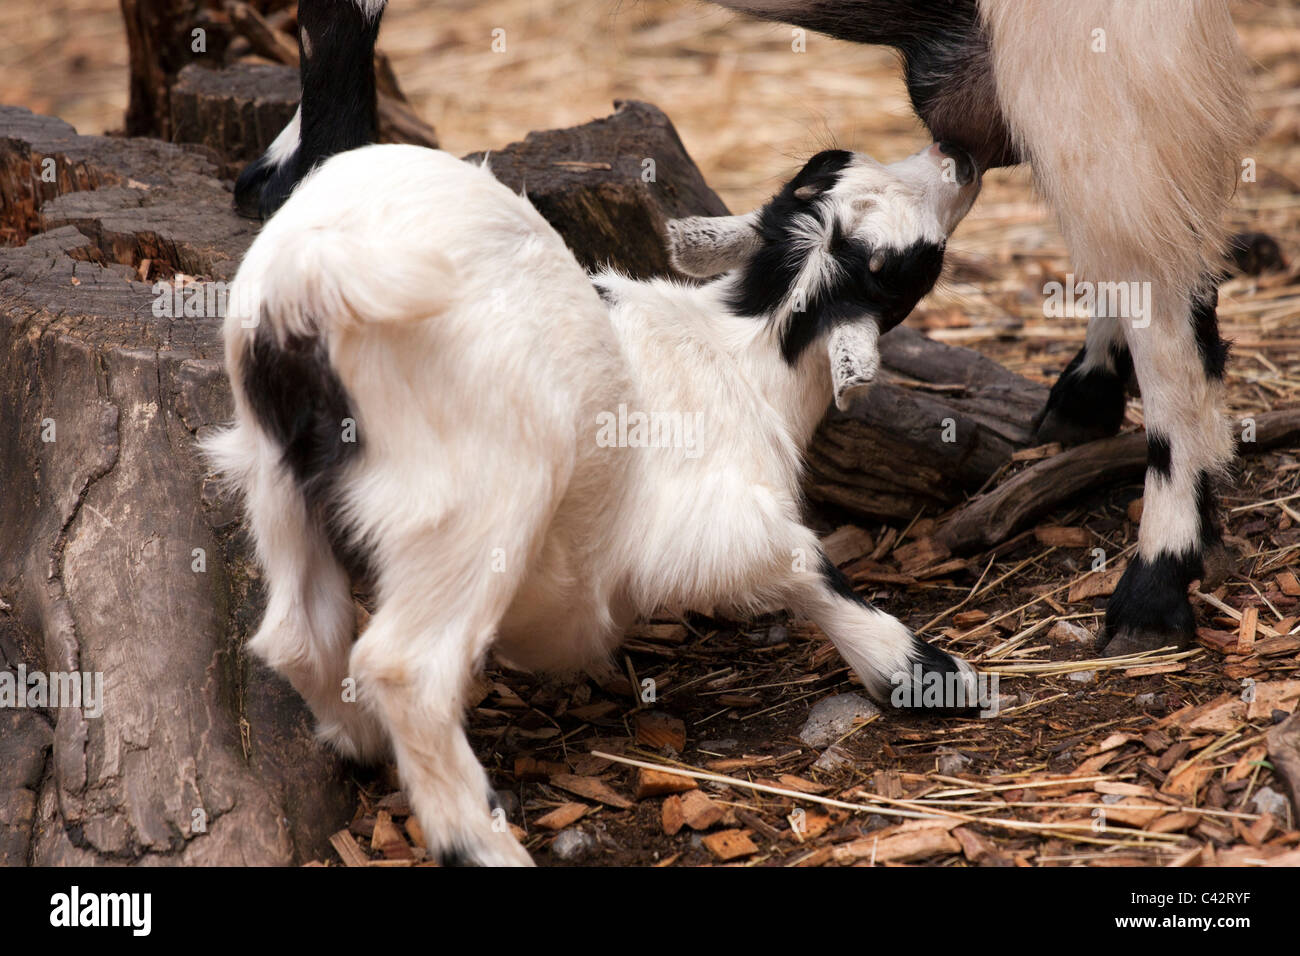 Baby goat drinking milk from mother goat. Stock Photo